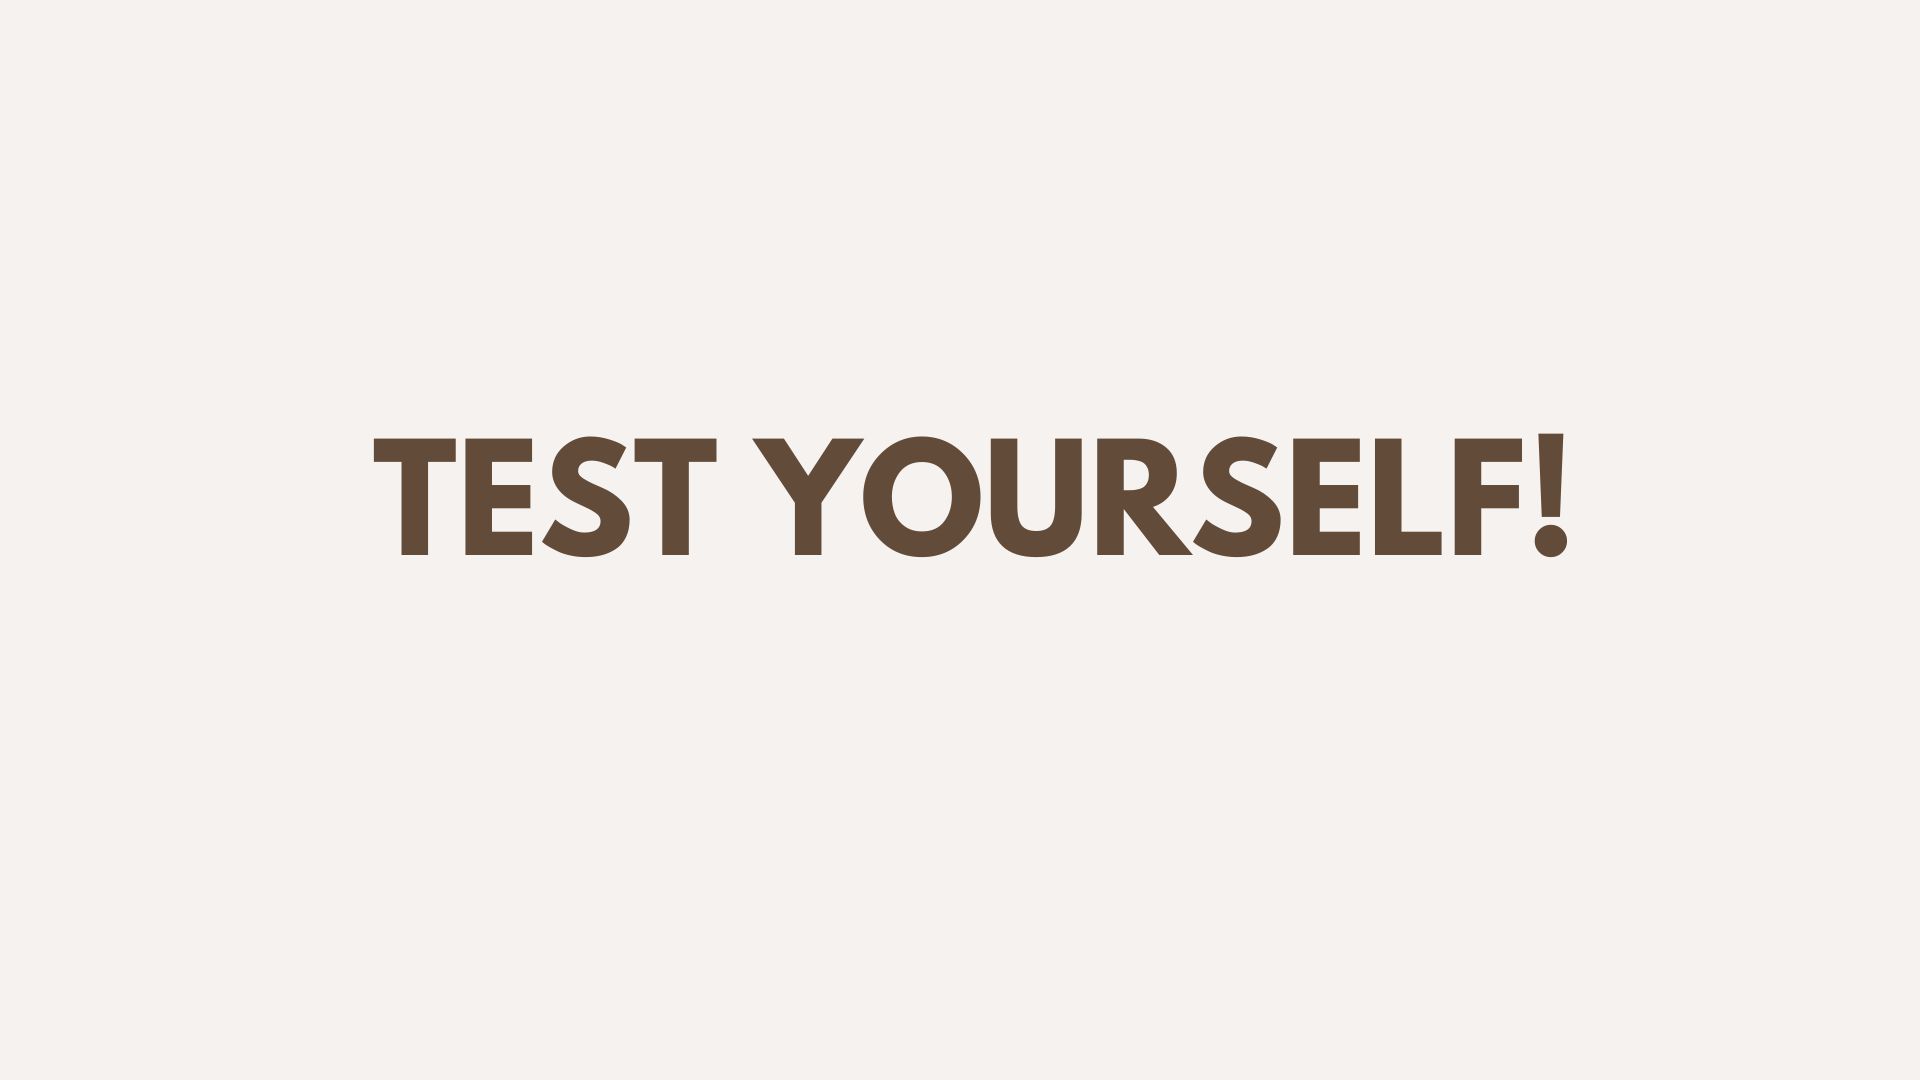 TEST YOURSELF! Course - 6